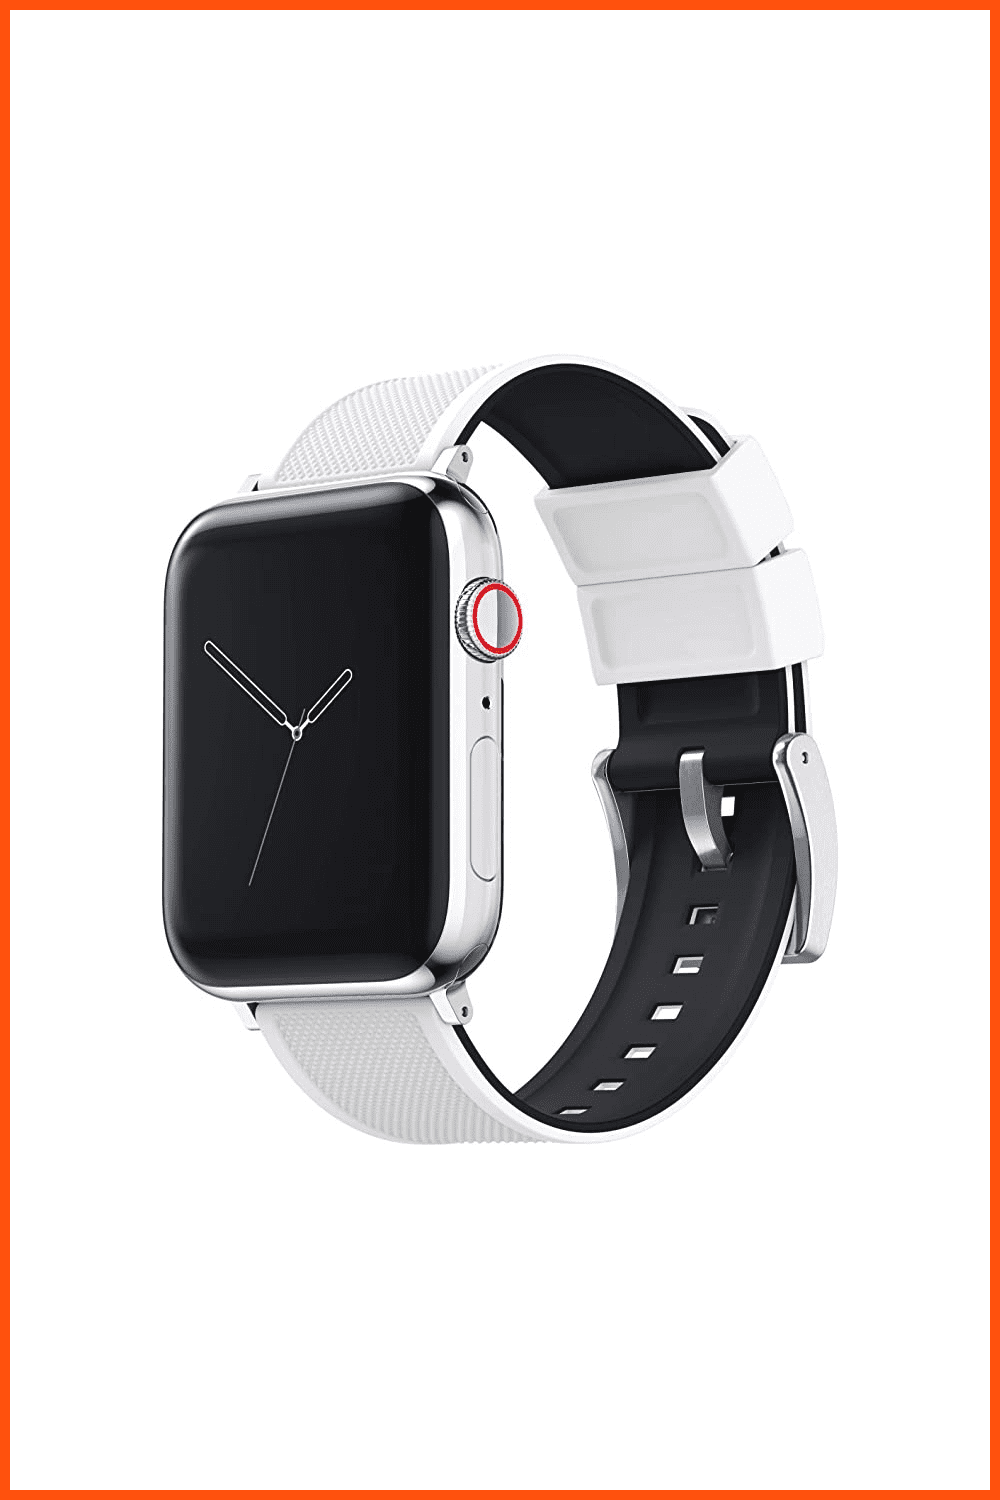 Apple wathces with black&white silicone band.